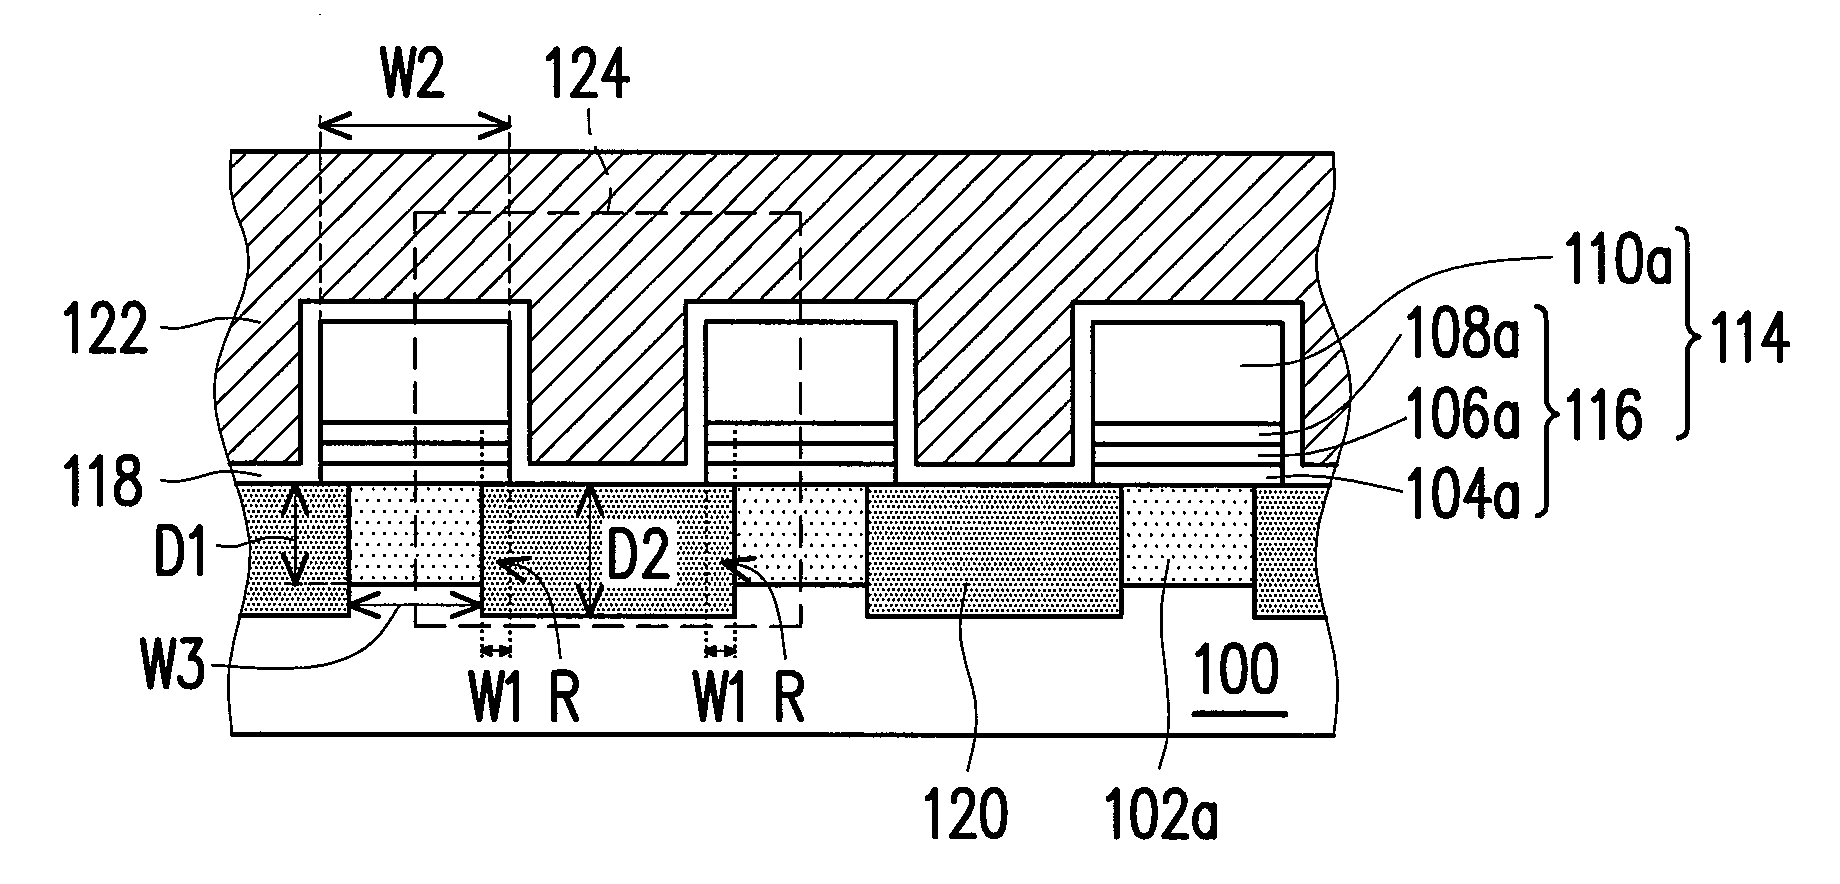 Fabricating method of non-volatile memory structure